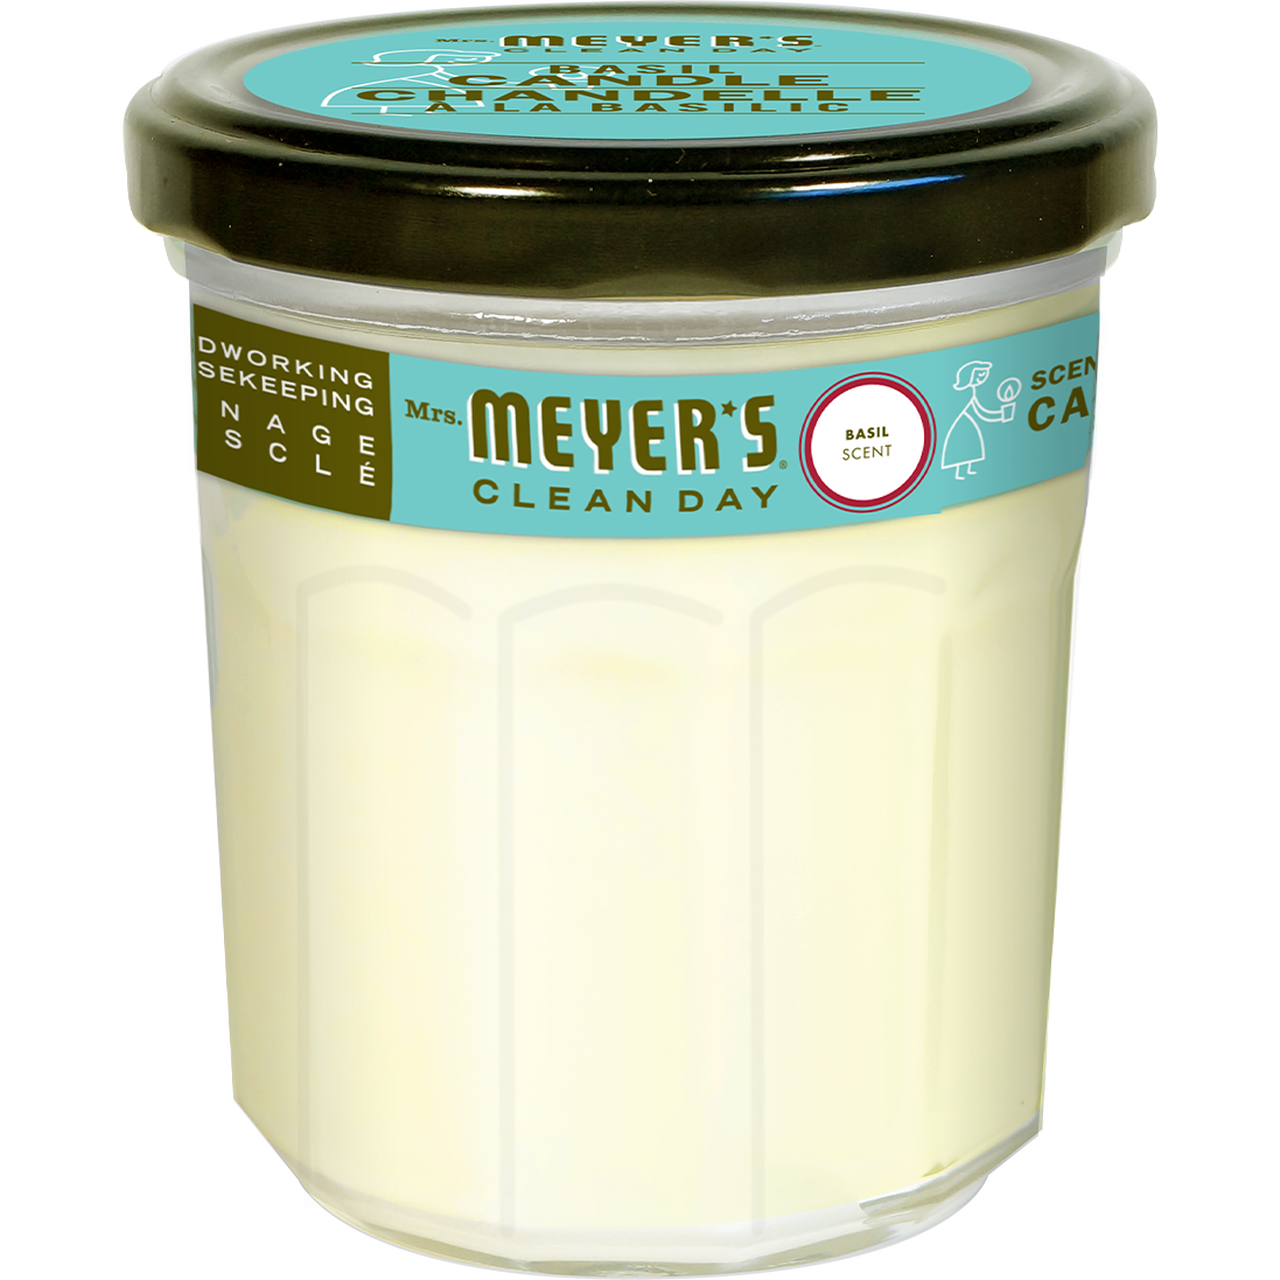 Basil Soy Candle by Mrs. Meyer's 7.2oz